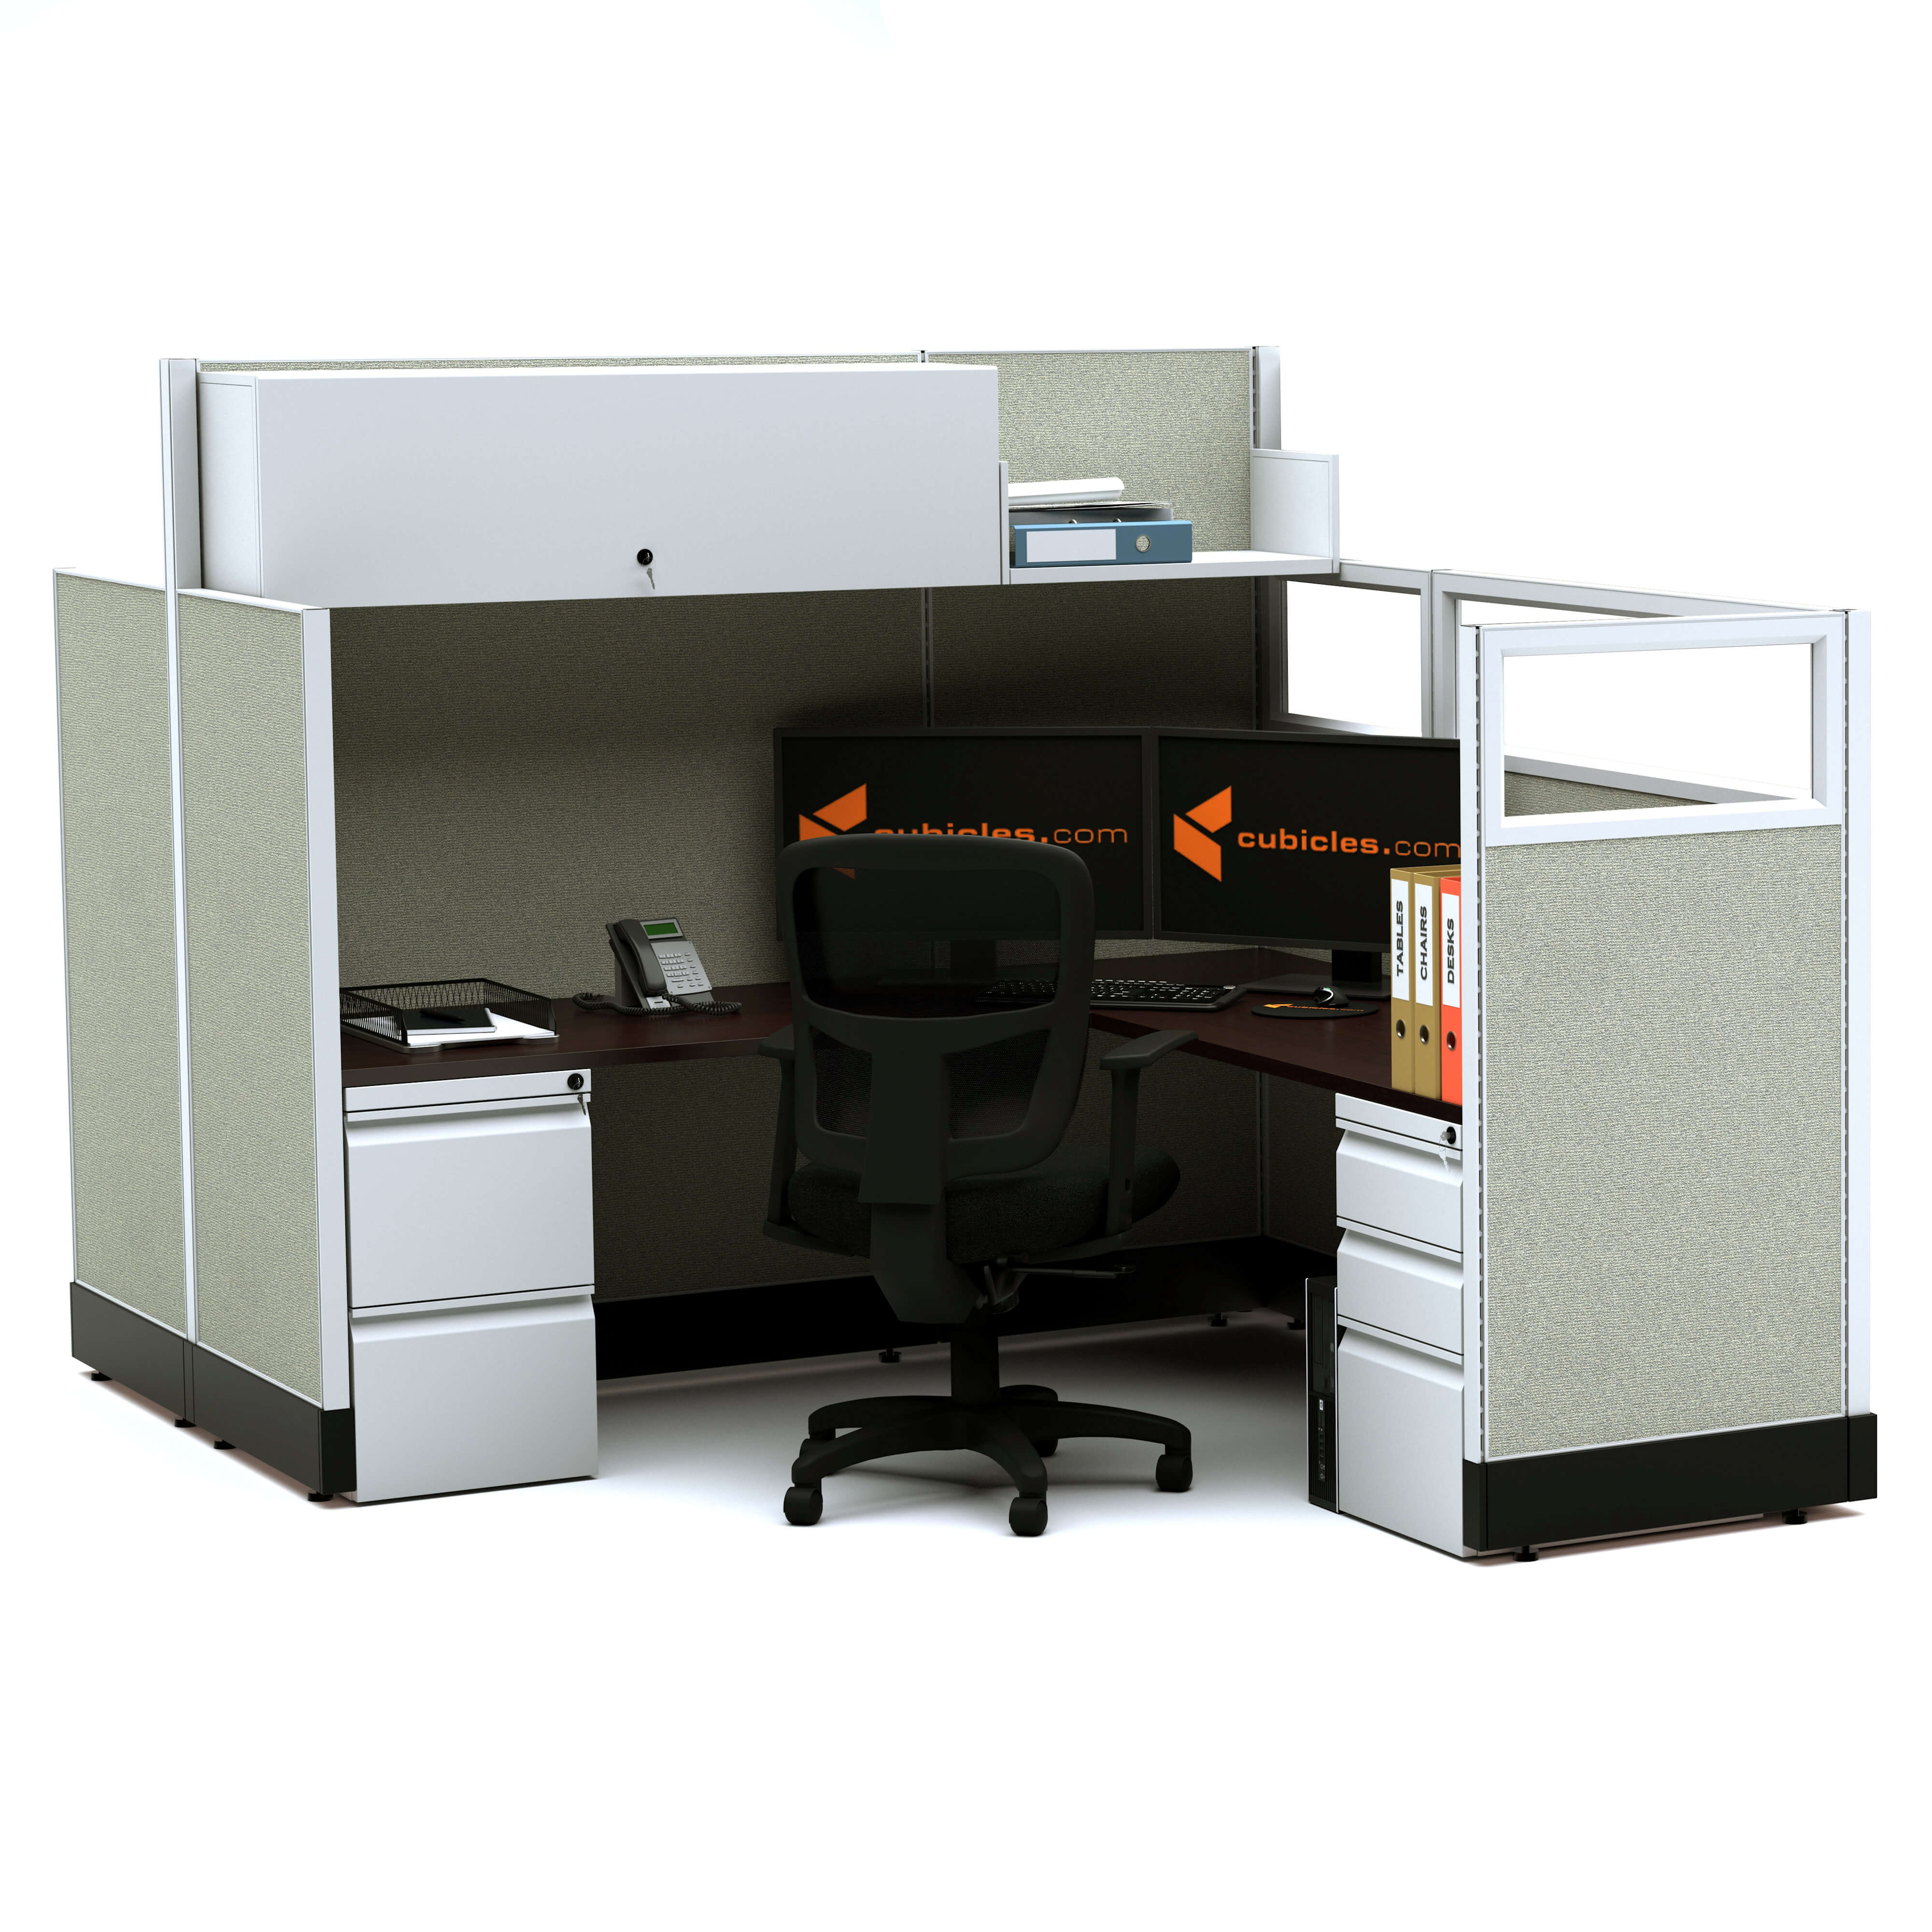 modular-office-furniture-partial-glass-office-cubicles-53-67h-2pack-cluster-non-powere.jpg